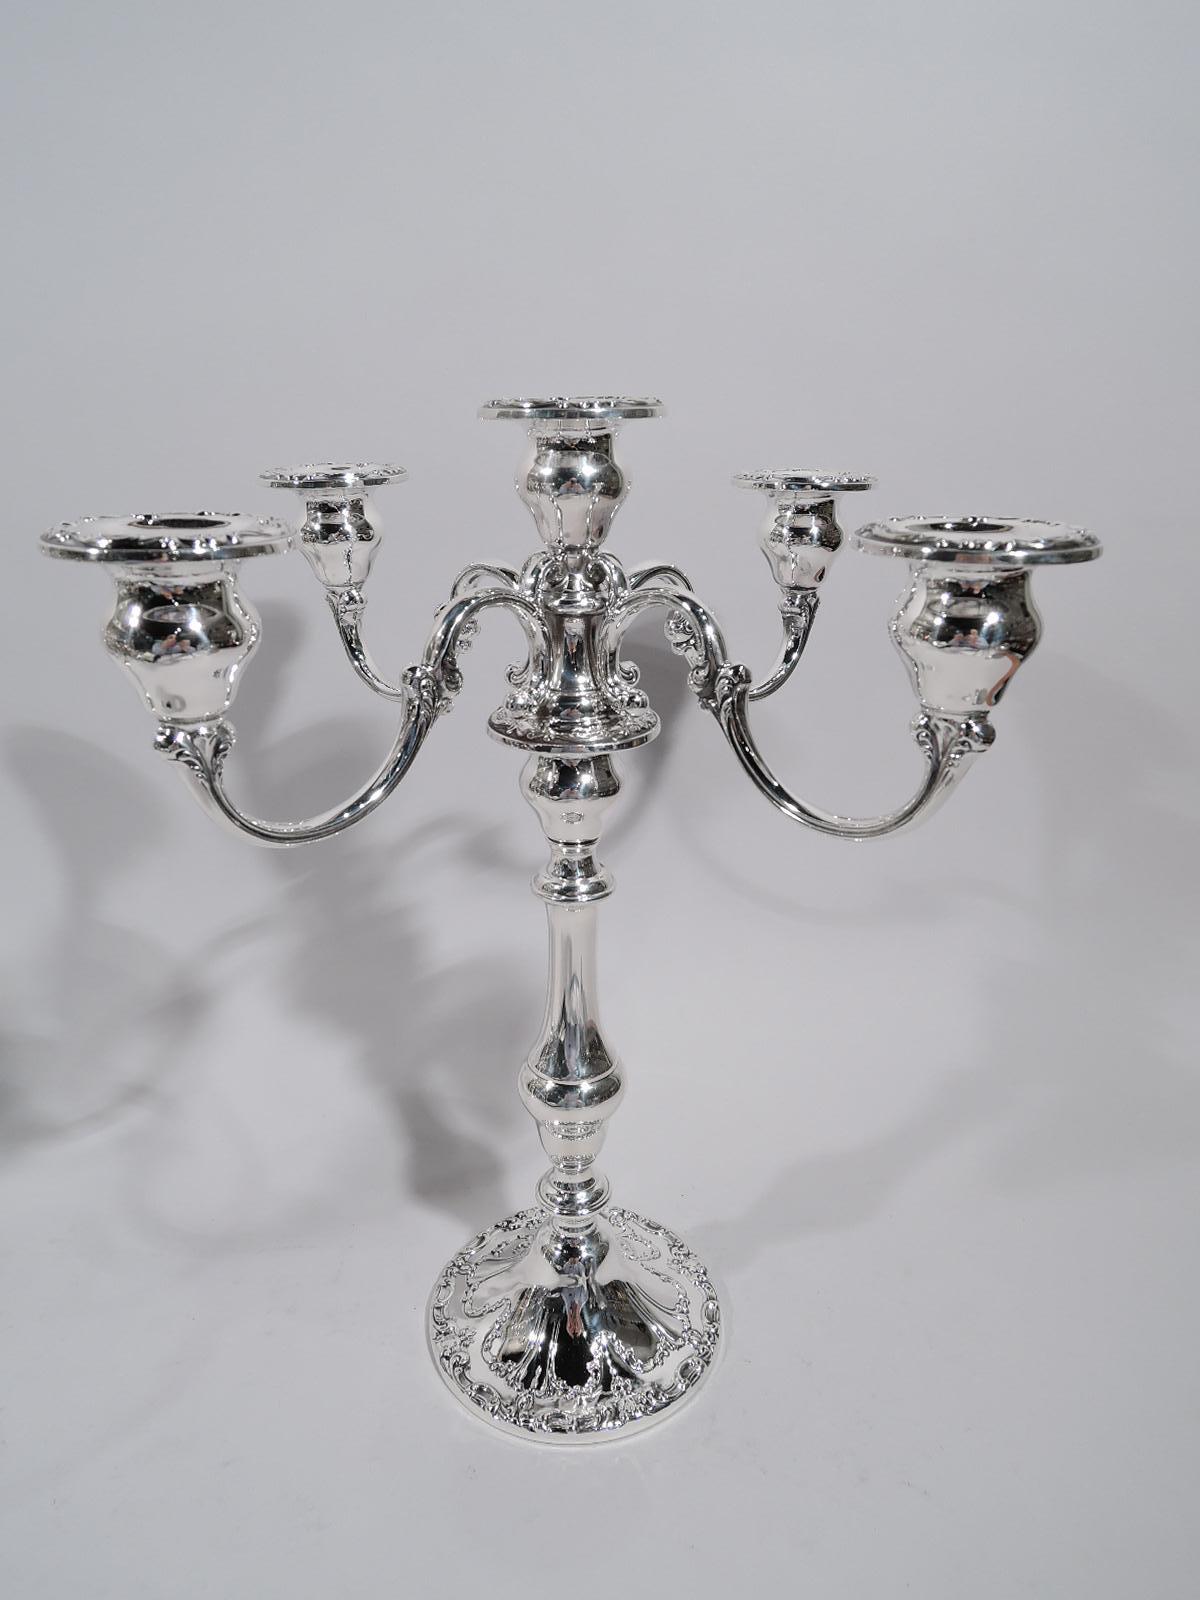 Chantilly sterling silver 5-light candelabra. Made by Gorham in Providence. Each: Baluster shaft on raised foot; raised central socket and 4 S-scroll arms, each terminating in single socket. Sockets bellied urn. Applied scrolls and garlands. A